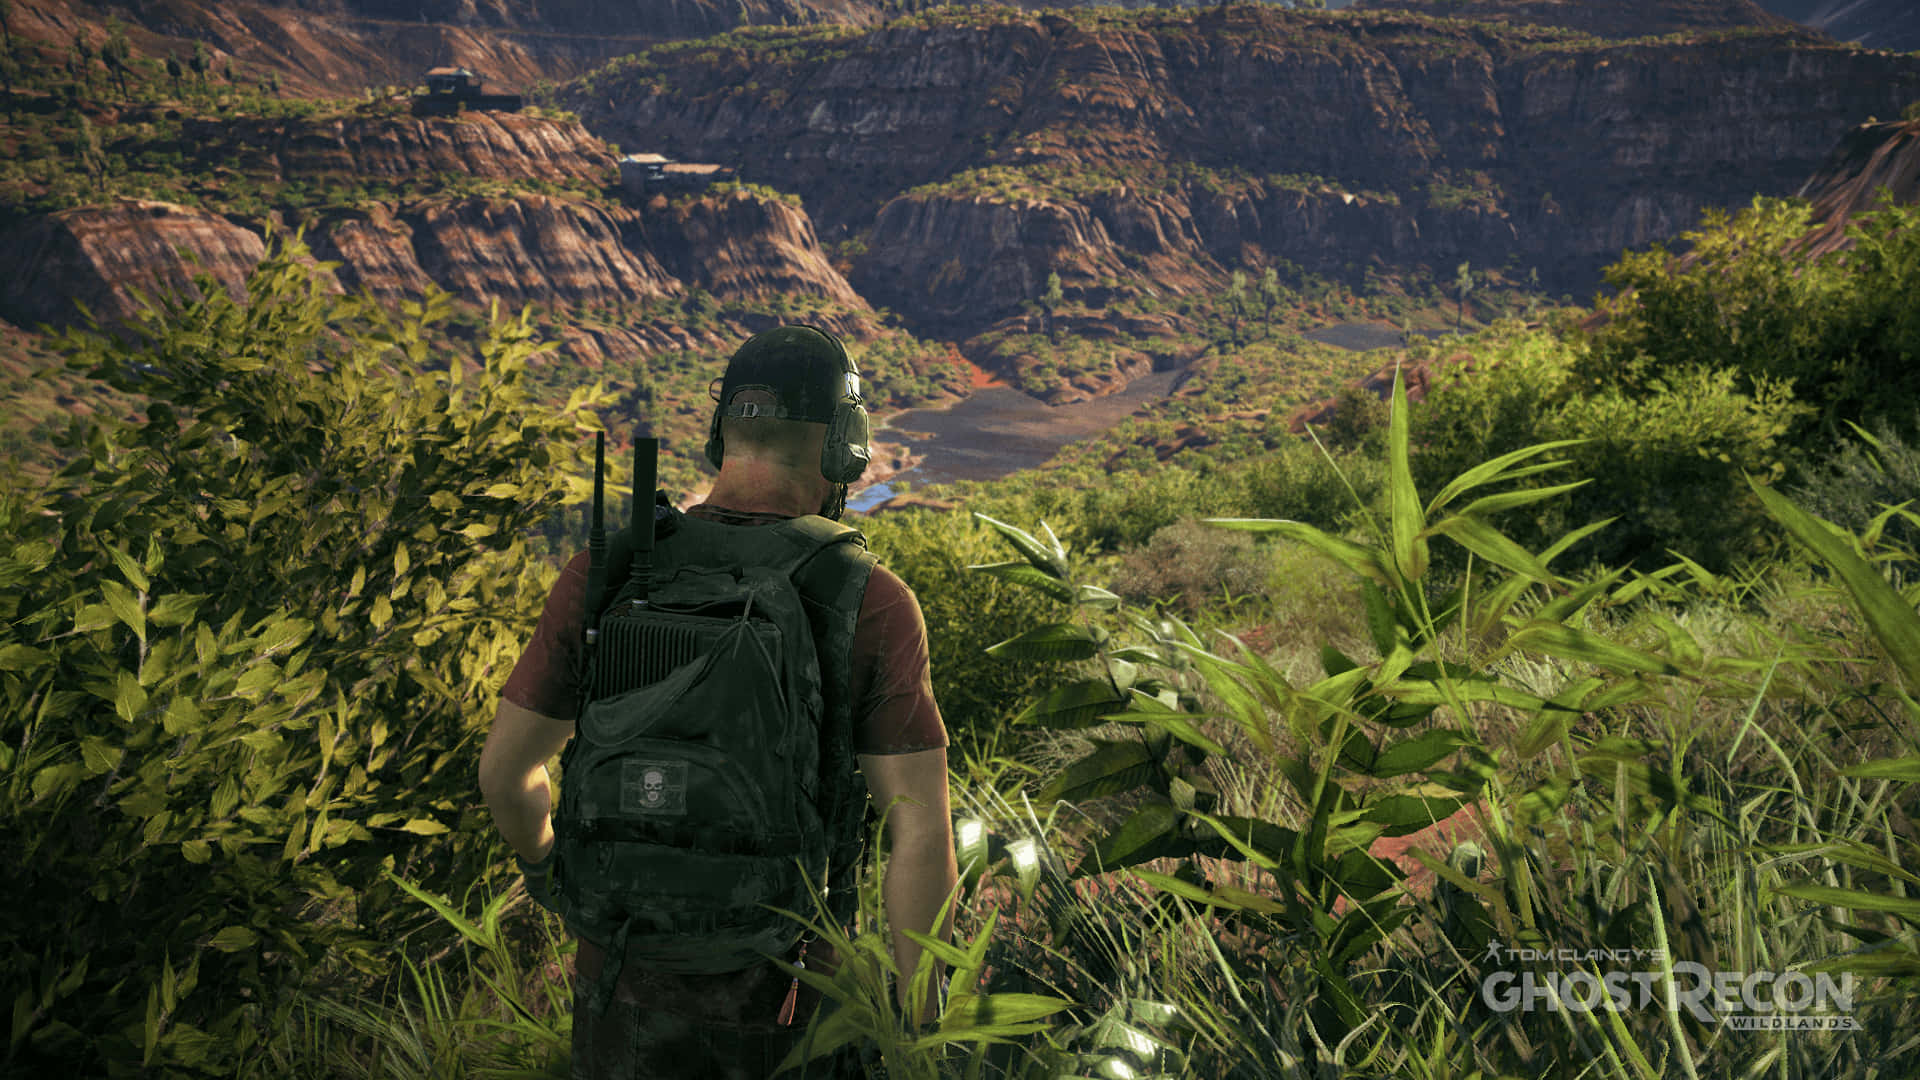 Immersive HD Image of Ghost Recon Wildlands Game Universe